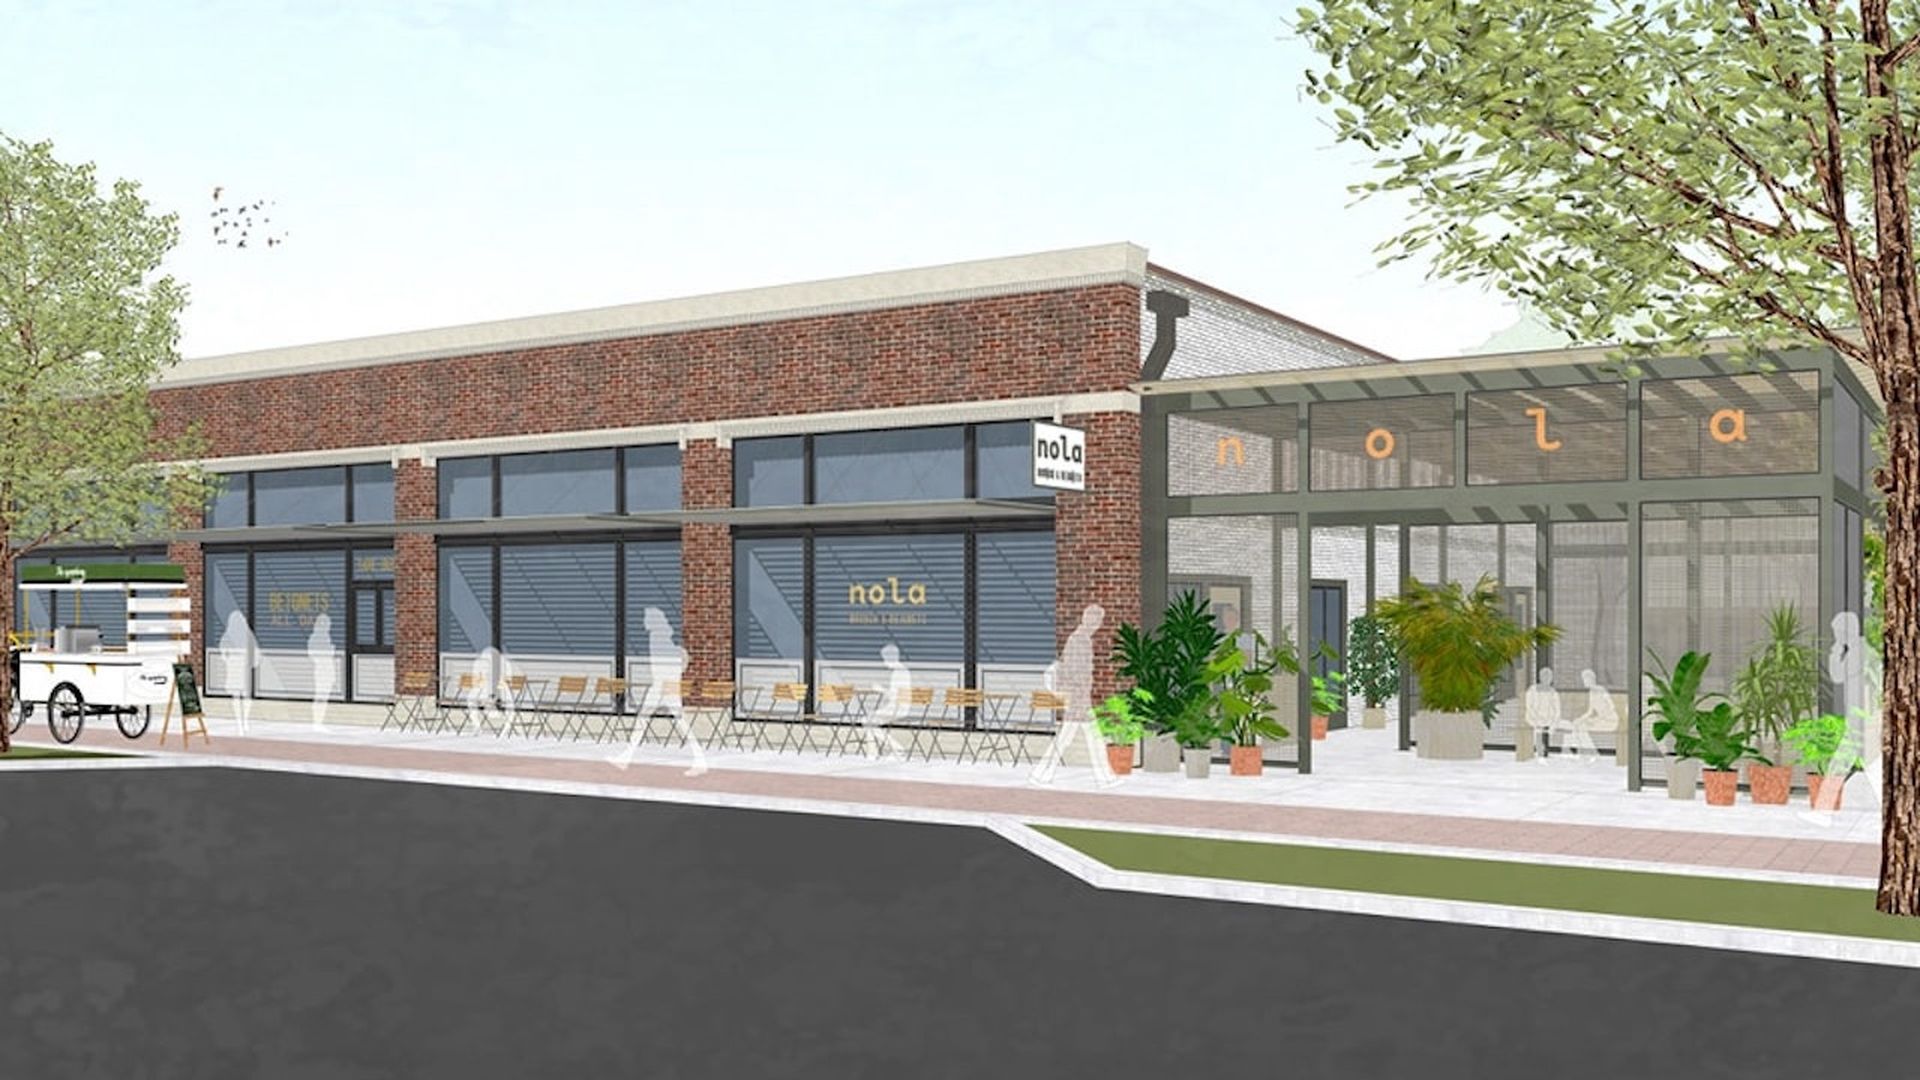 Rendering showing the front of the new NOLA, housed in a brick building.